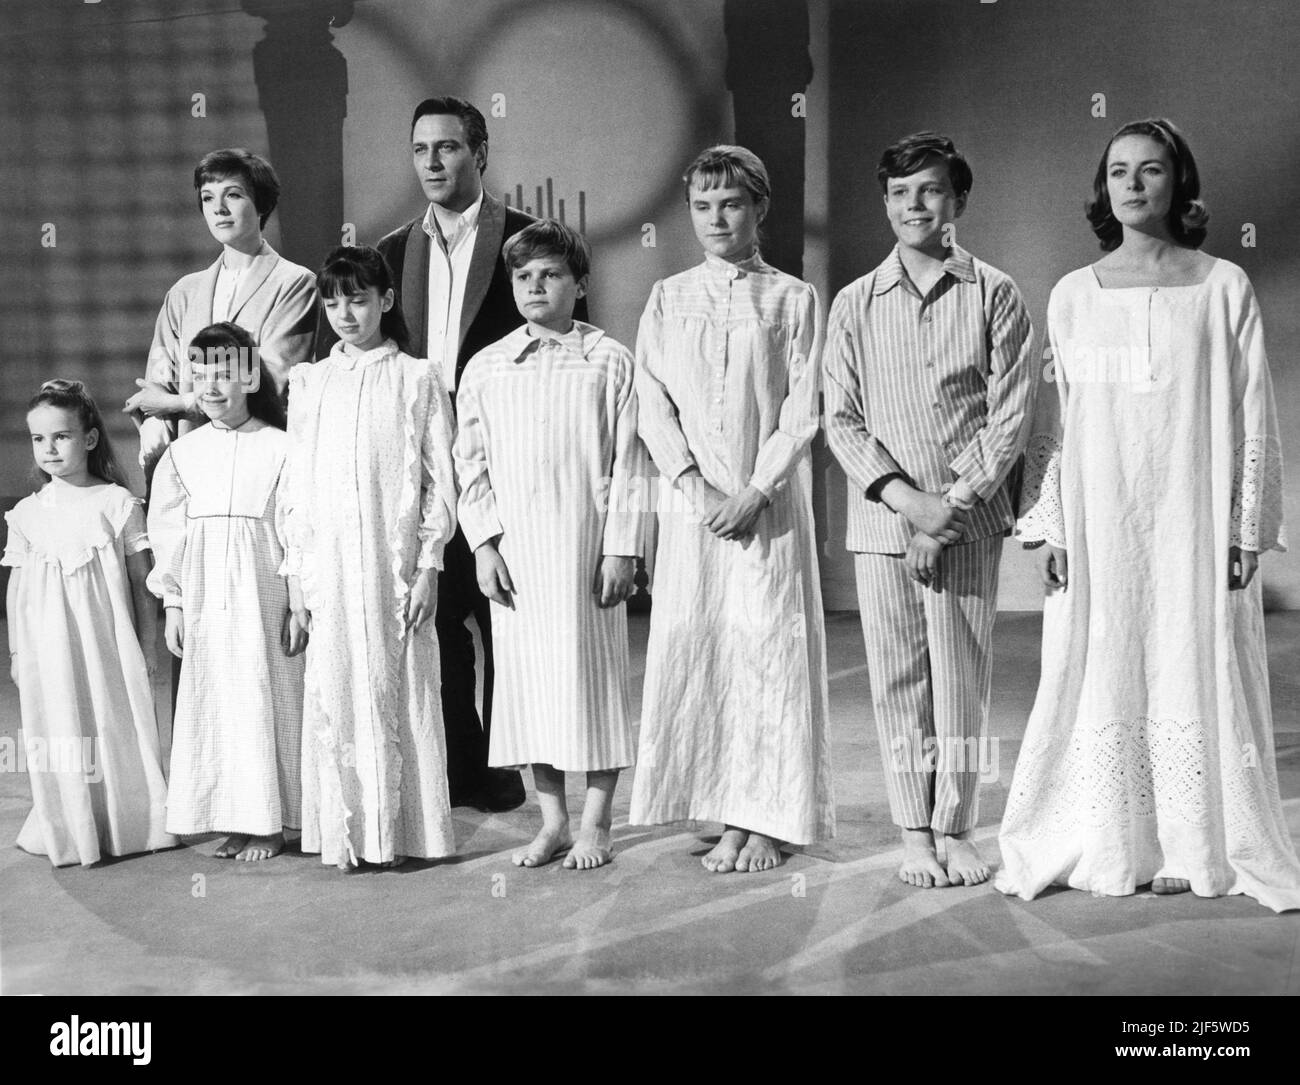 JULIE ANDREWS and CHRISTOPHER PLUMMER with KYM KARATH DEBBIE TURNER ANGELA CARTWRIGHT DUANE CHASE HEATHER MENZIES NICHOLAS HAMMOND and CHARMIAN CARR in one of the 1st publicity portraits in costume for THE SOUND OF MUSIC 1965 director ROBERT WISE music Richard Rodgers lyrics Oscar Hammerstein II Robert Wise productions / Argyle Enterprises / Twentieth Century Fox Stock Photo